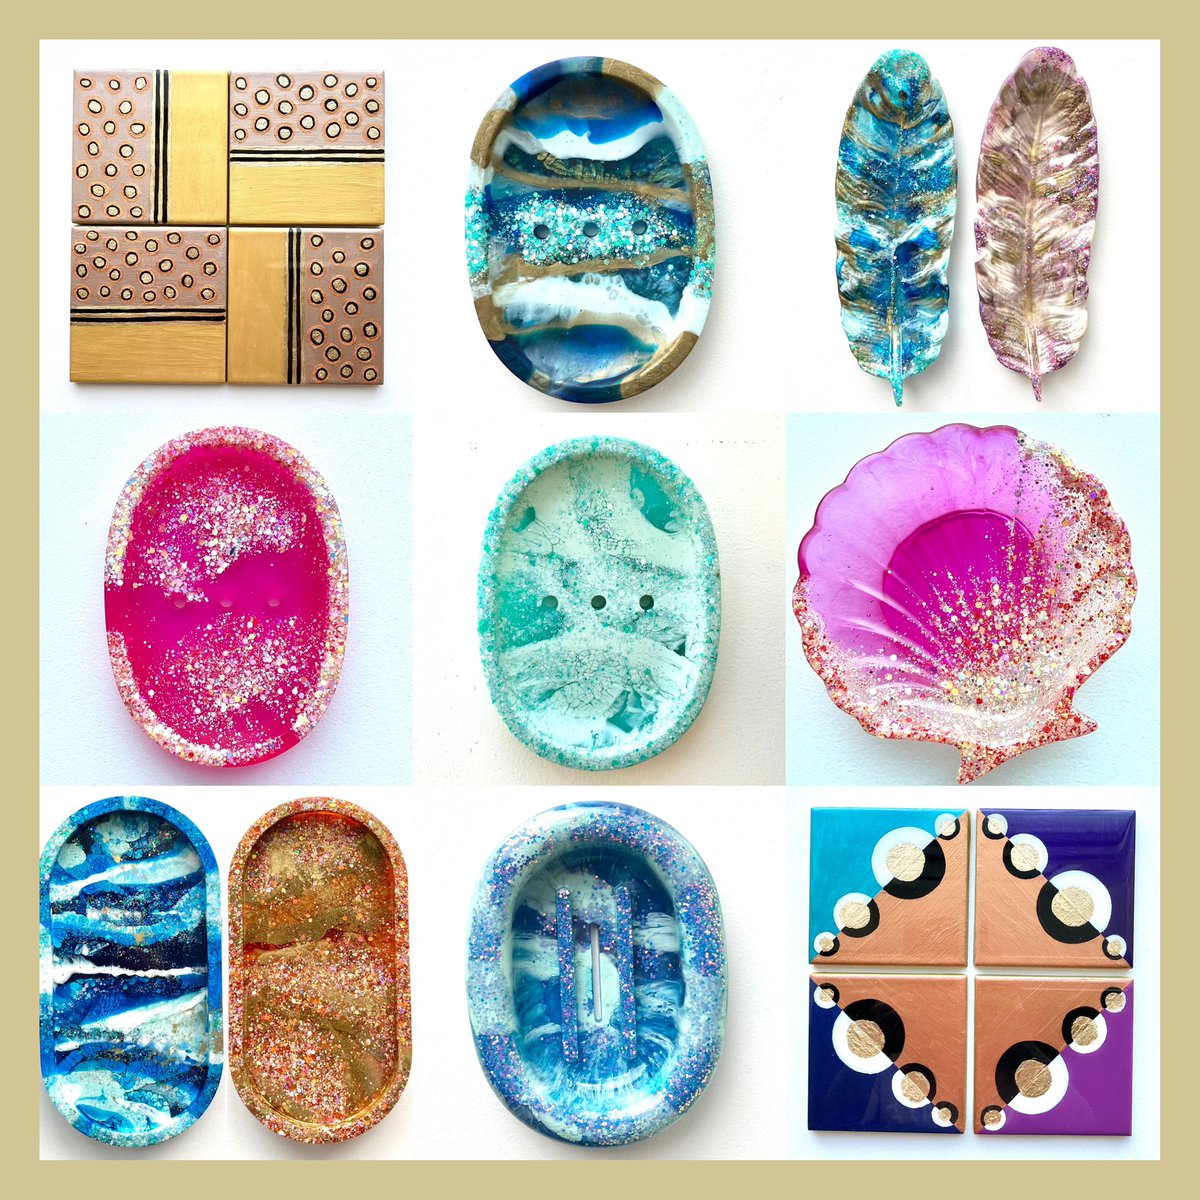 Check out these new resin items in my shop, new tiles coasters, soap dishes, trays & feather dishes. The perfect gift for any occasion: muresindesigns.etsy.com #UKGiftHour #ukgiftam #shopindie #crafturday #sundayfringe #craftbizparty #giftidea